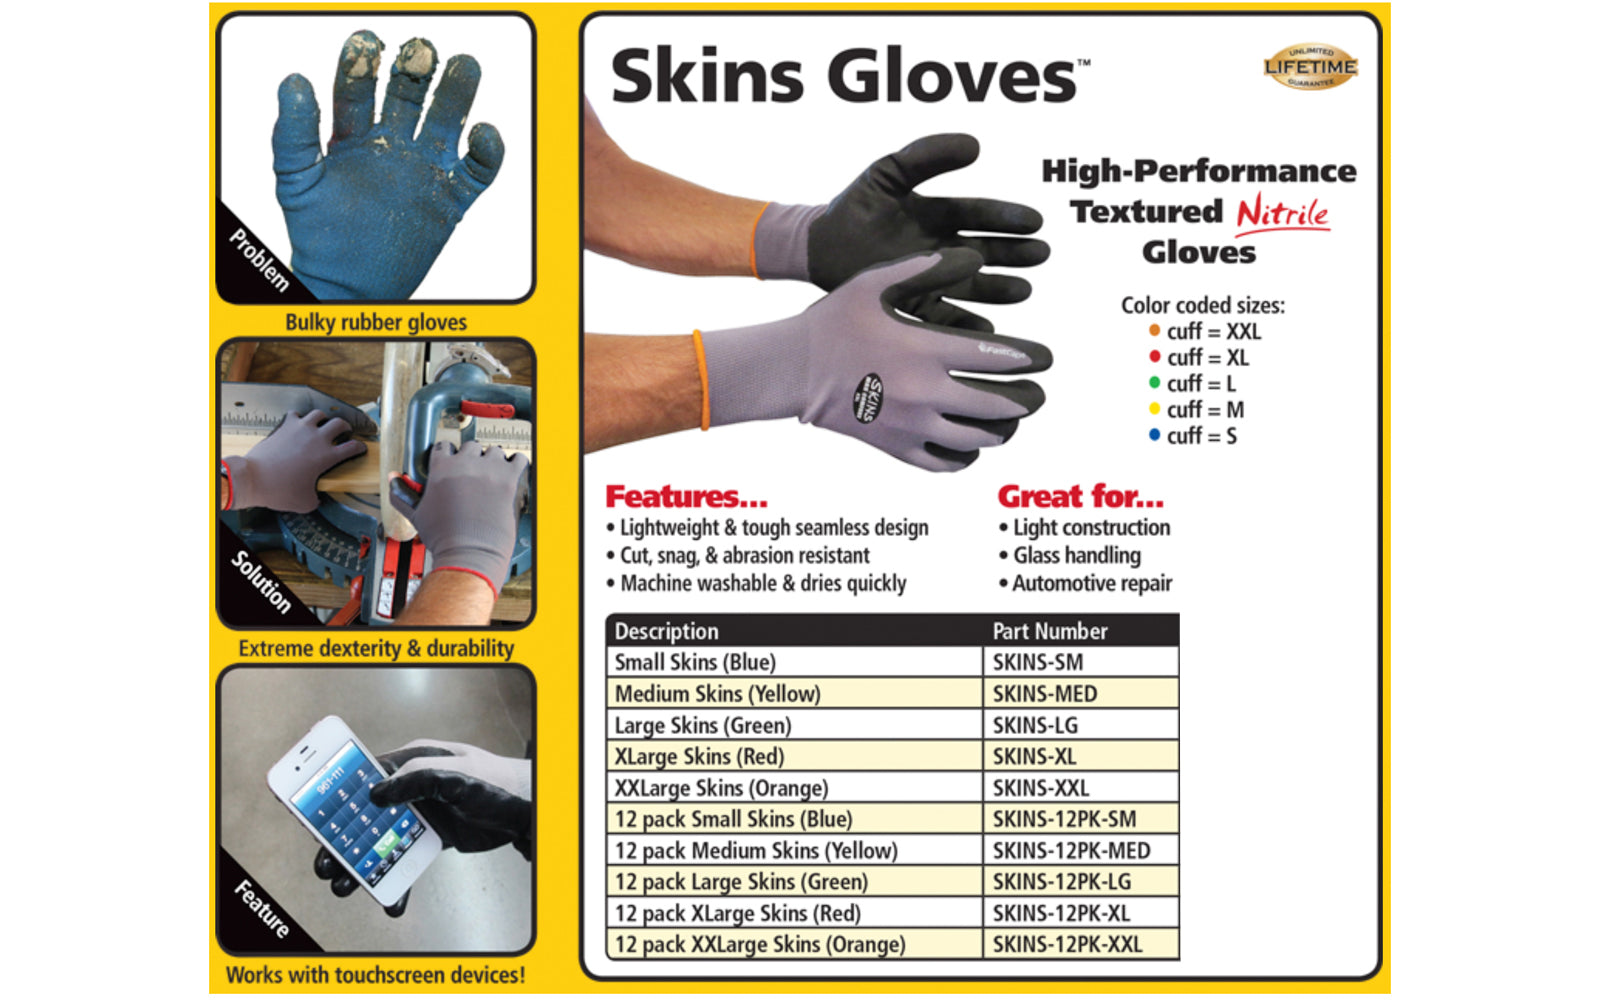 FastCap Skins Work Gloves - Nitrile Coated Palms - Model No. SKINS ~ These gloves have great dexterity & durability. Will work on most touchscreens - Great for light construction, handling wood lumber & melamine, mill work, glass handling, metal parts, automotive repair & parts assembly, & more